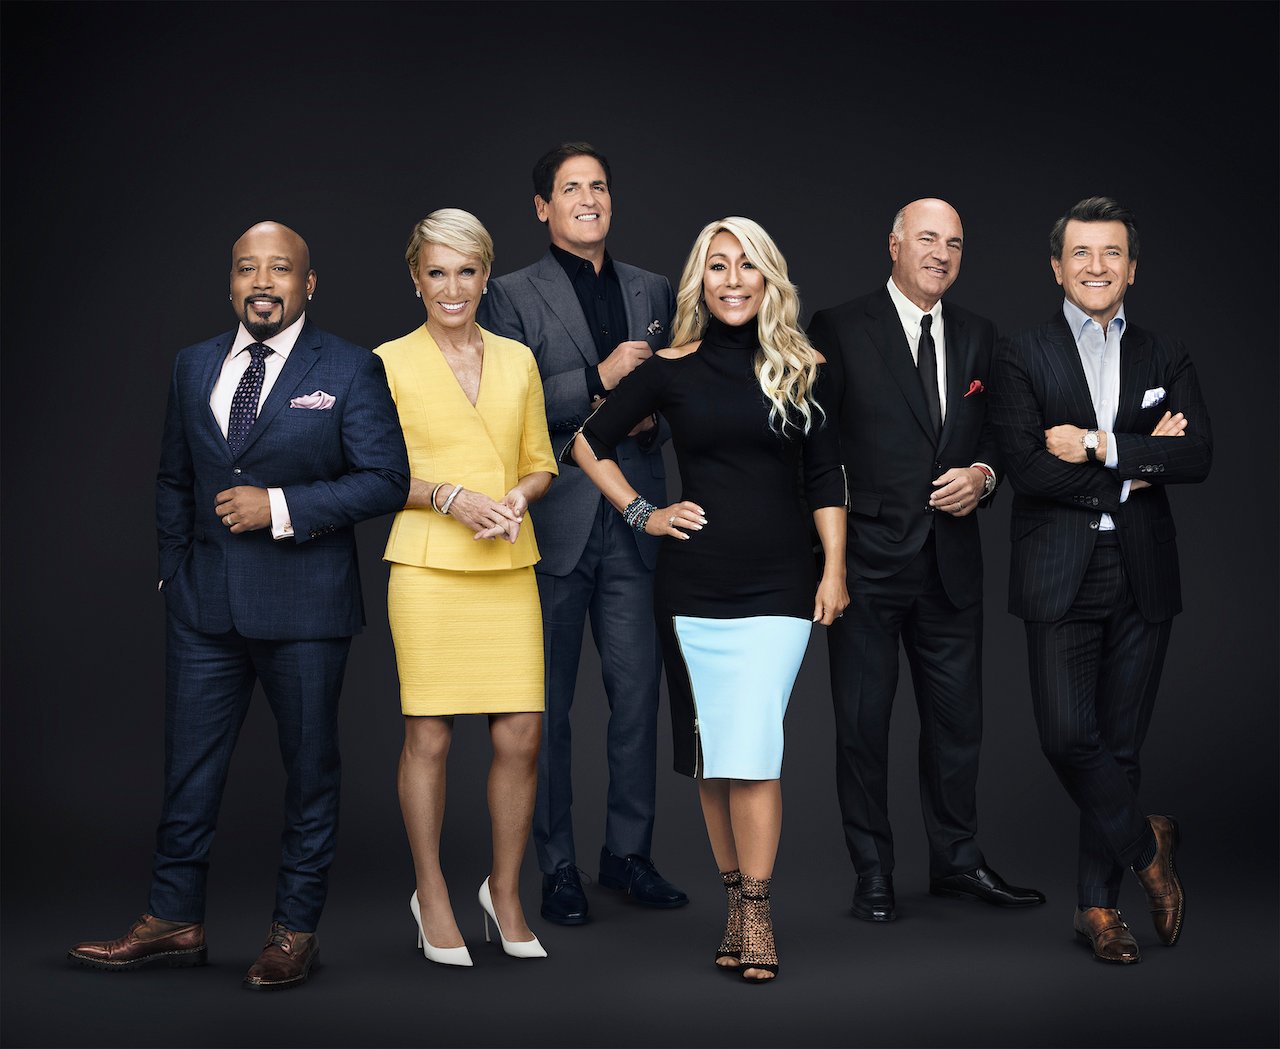 'Shark Tank' Where Did the Sharks Go To College?